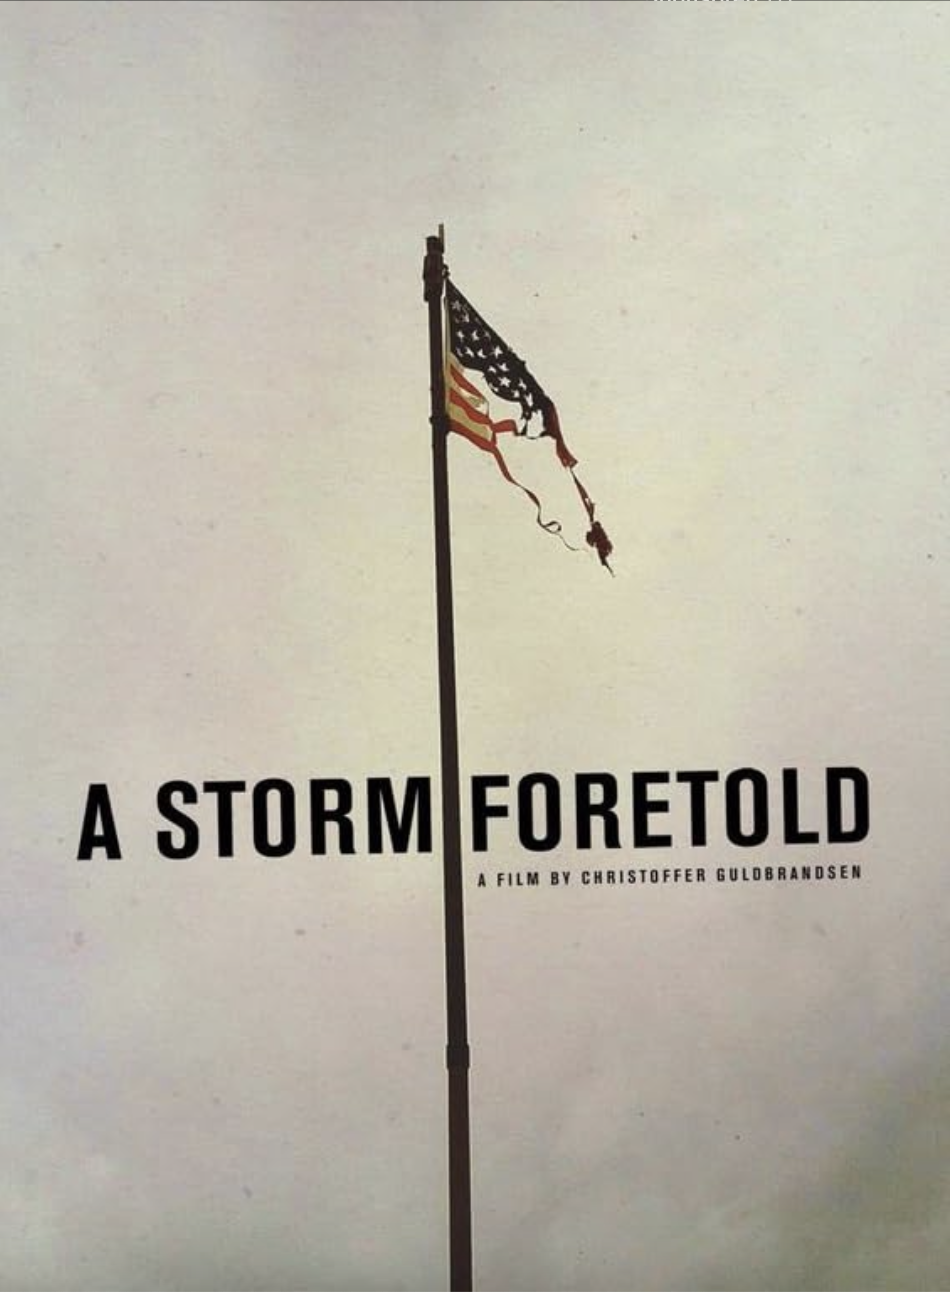 A poster for 'A Storm Foretold'